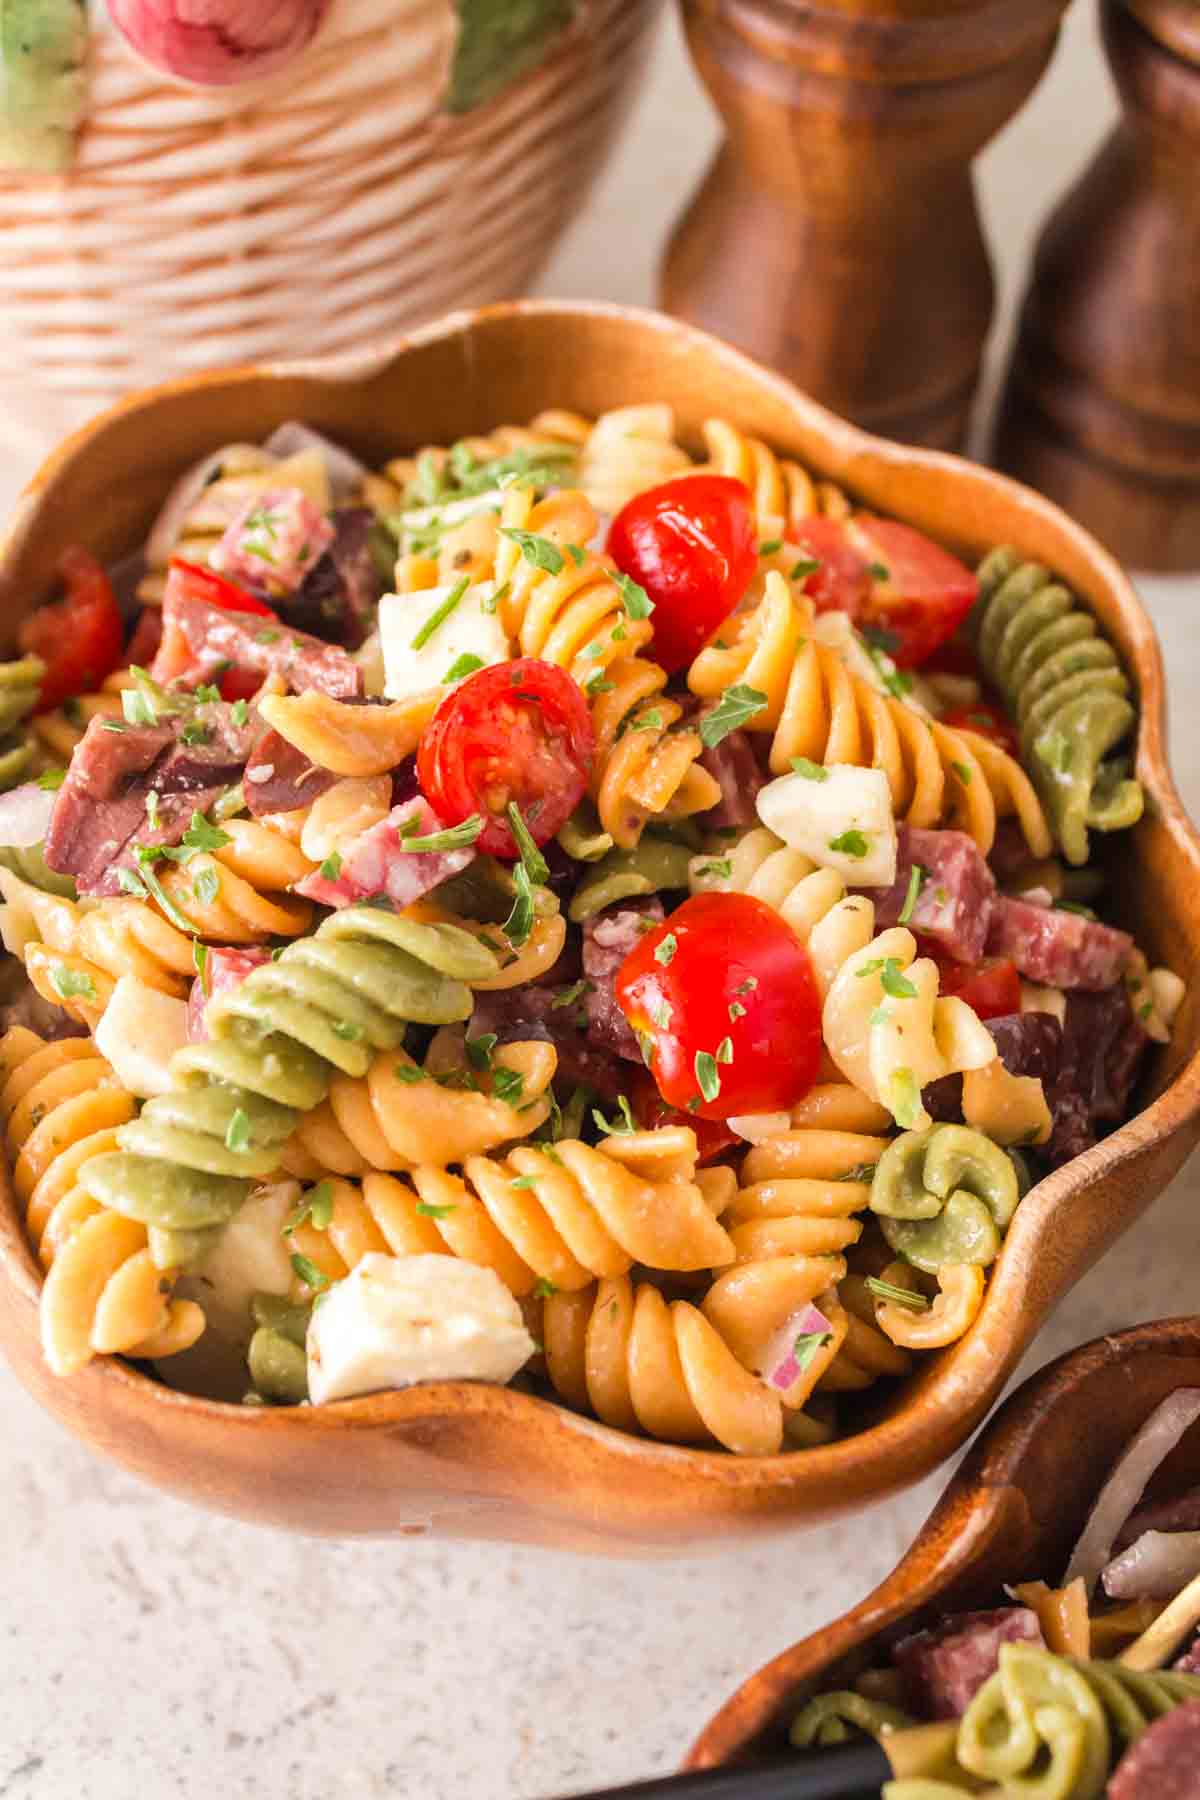 Italian pasta salad in a wooden bowl